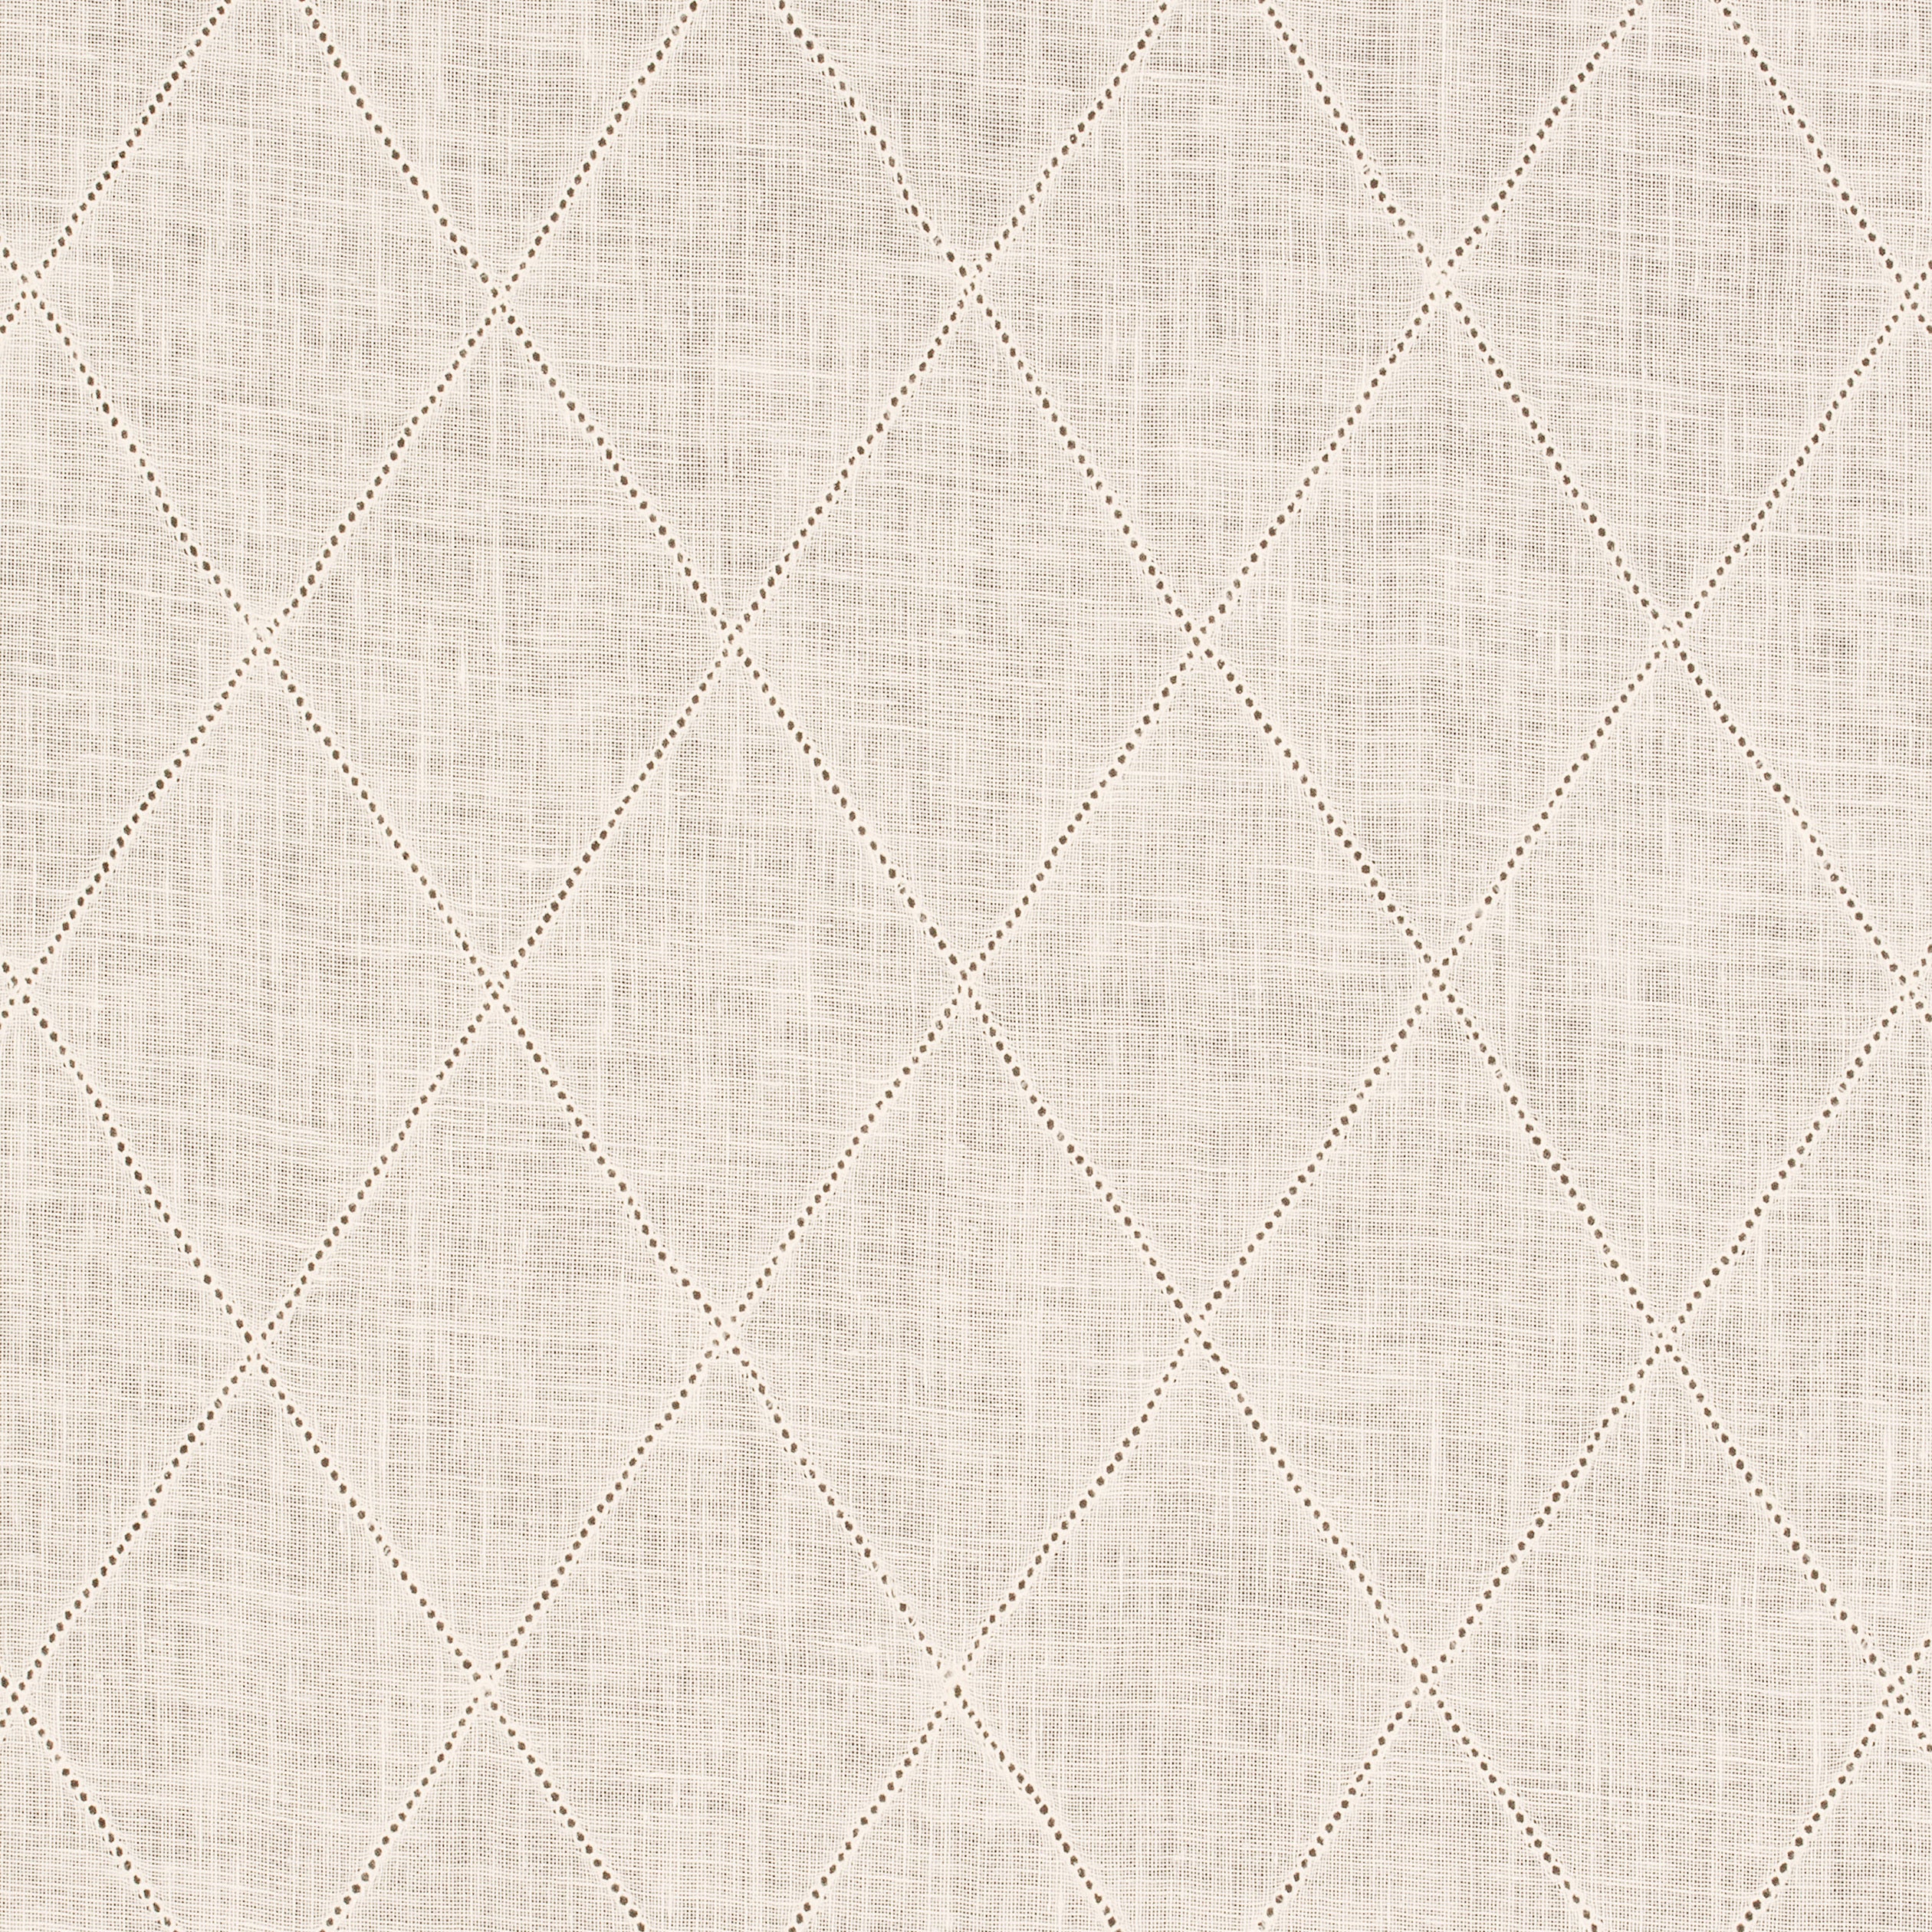 Claremont Trellis fabric in ivory color - pattern number W772588 - by Thibaut in the Chestnut Hill collection